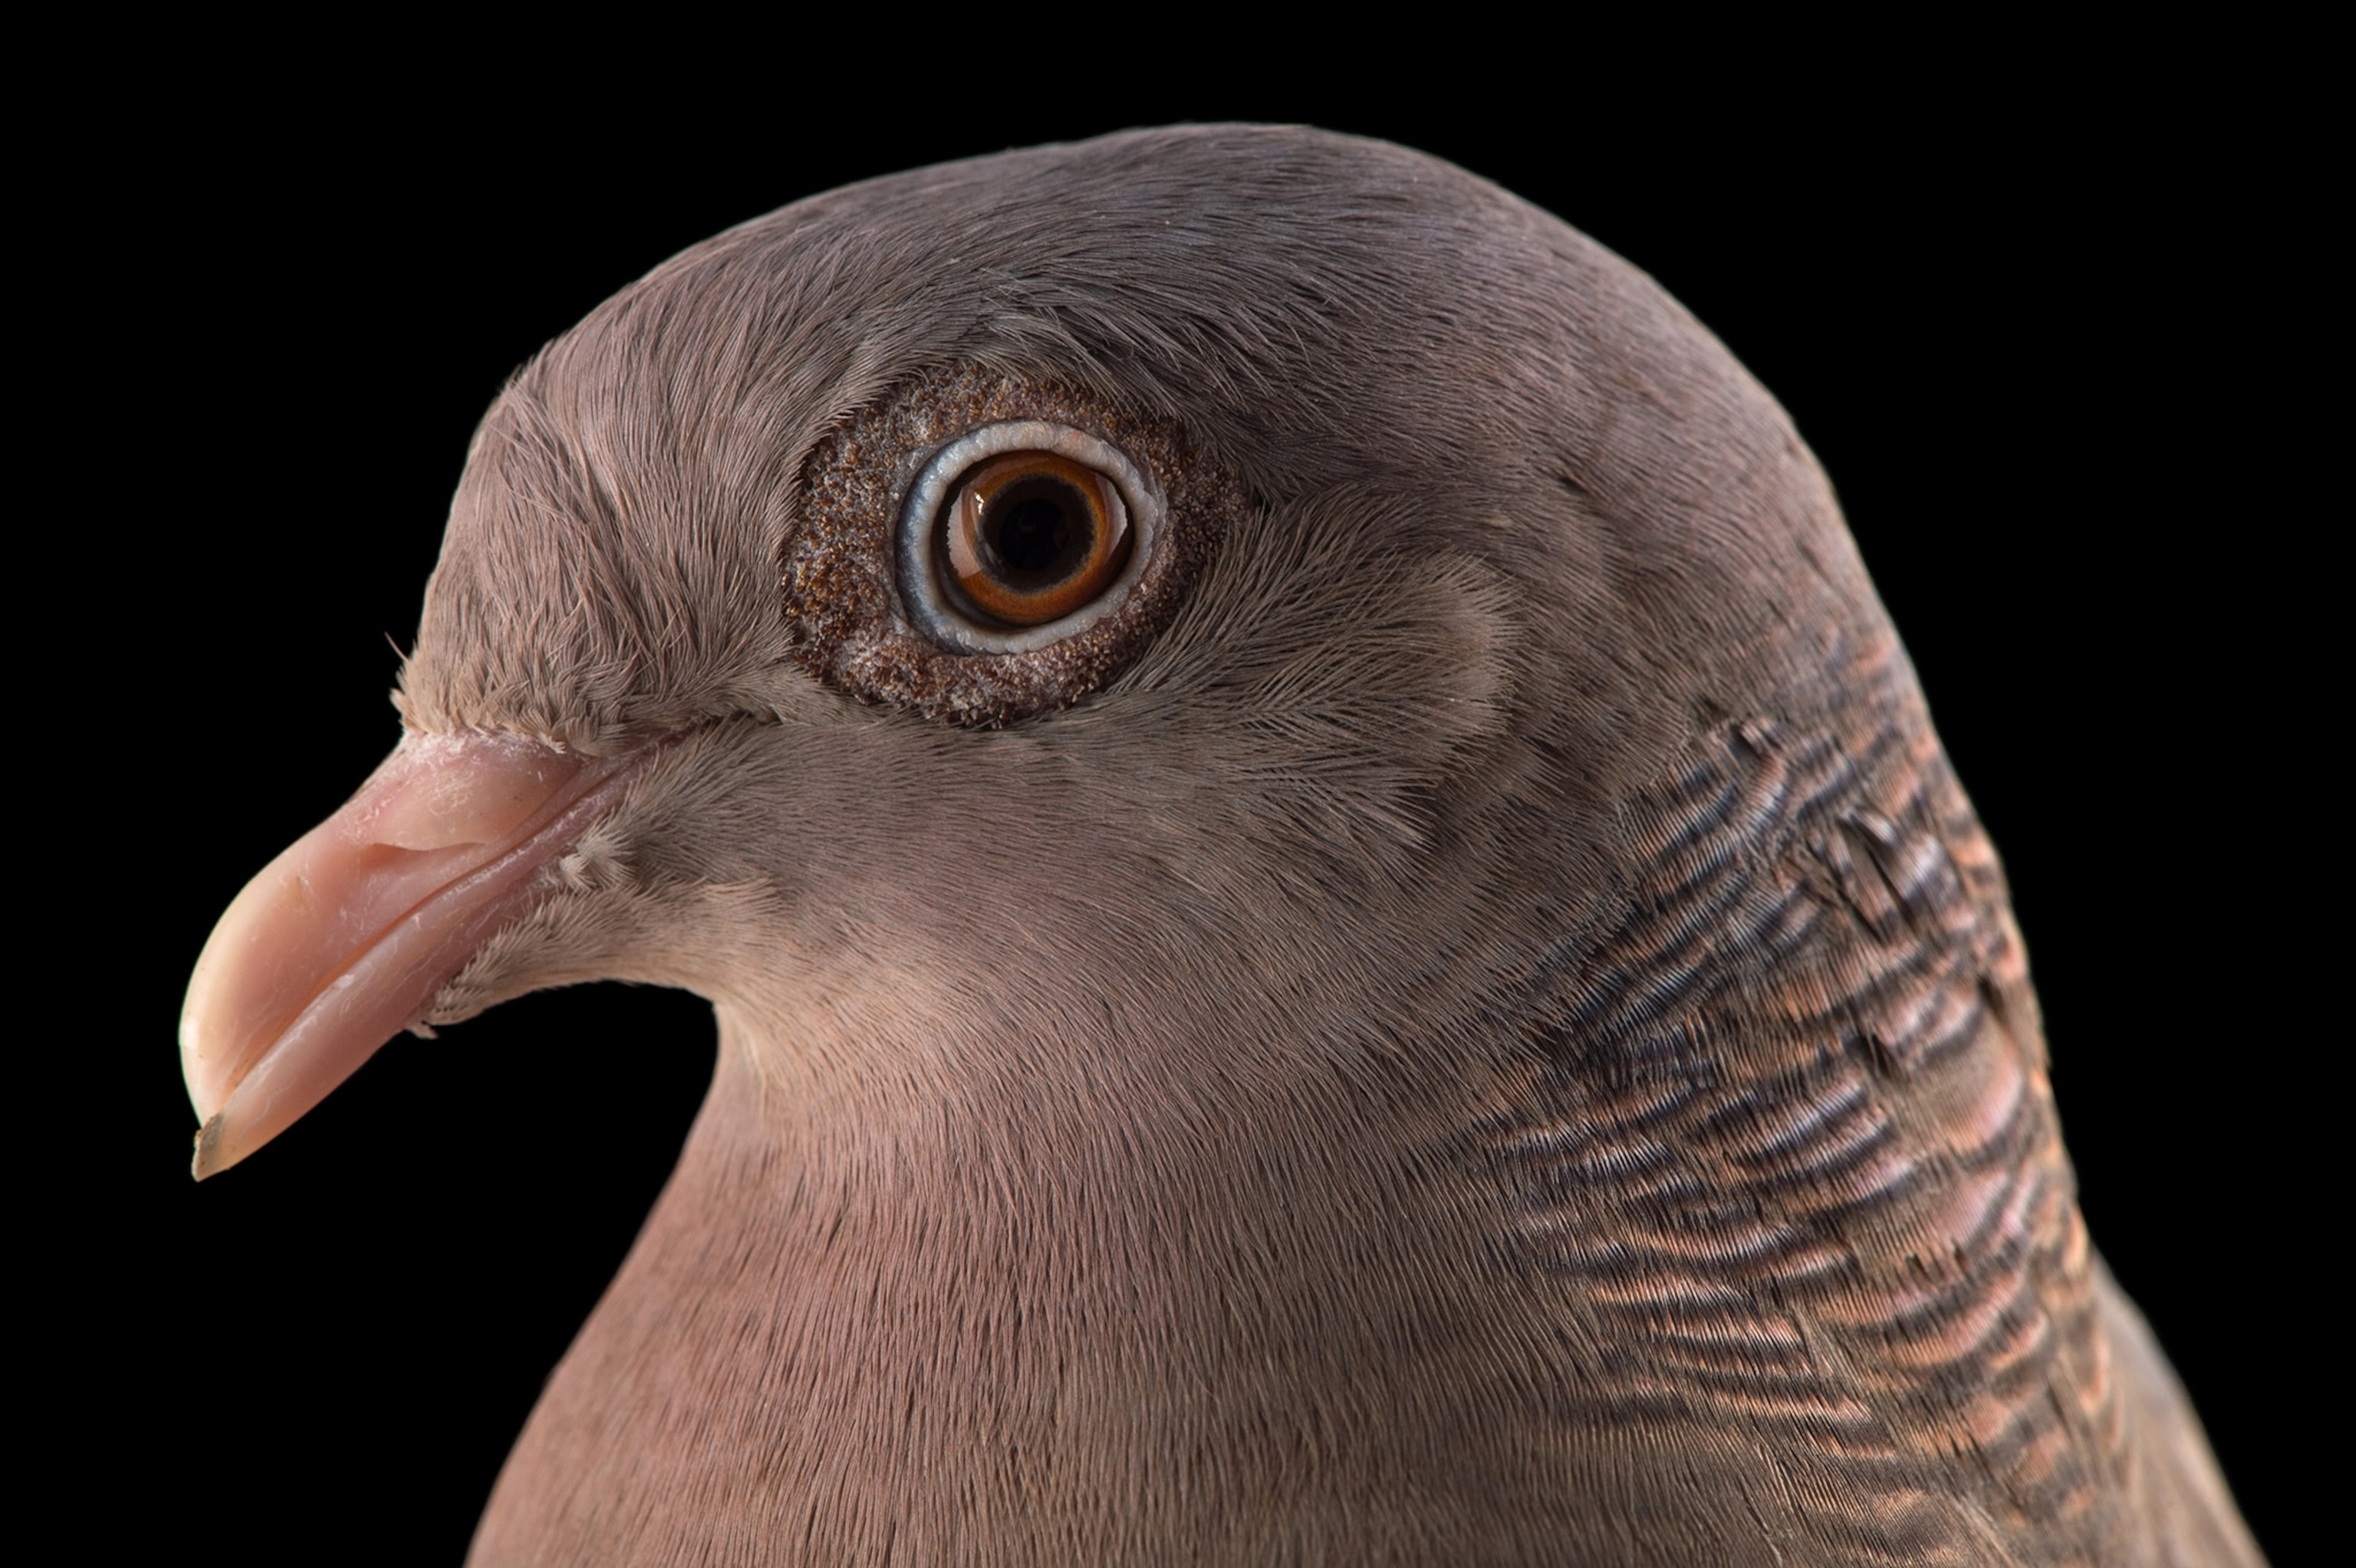 Studio photograph of a Bare eyed pigeon